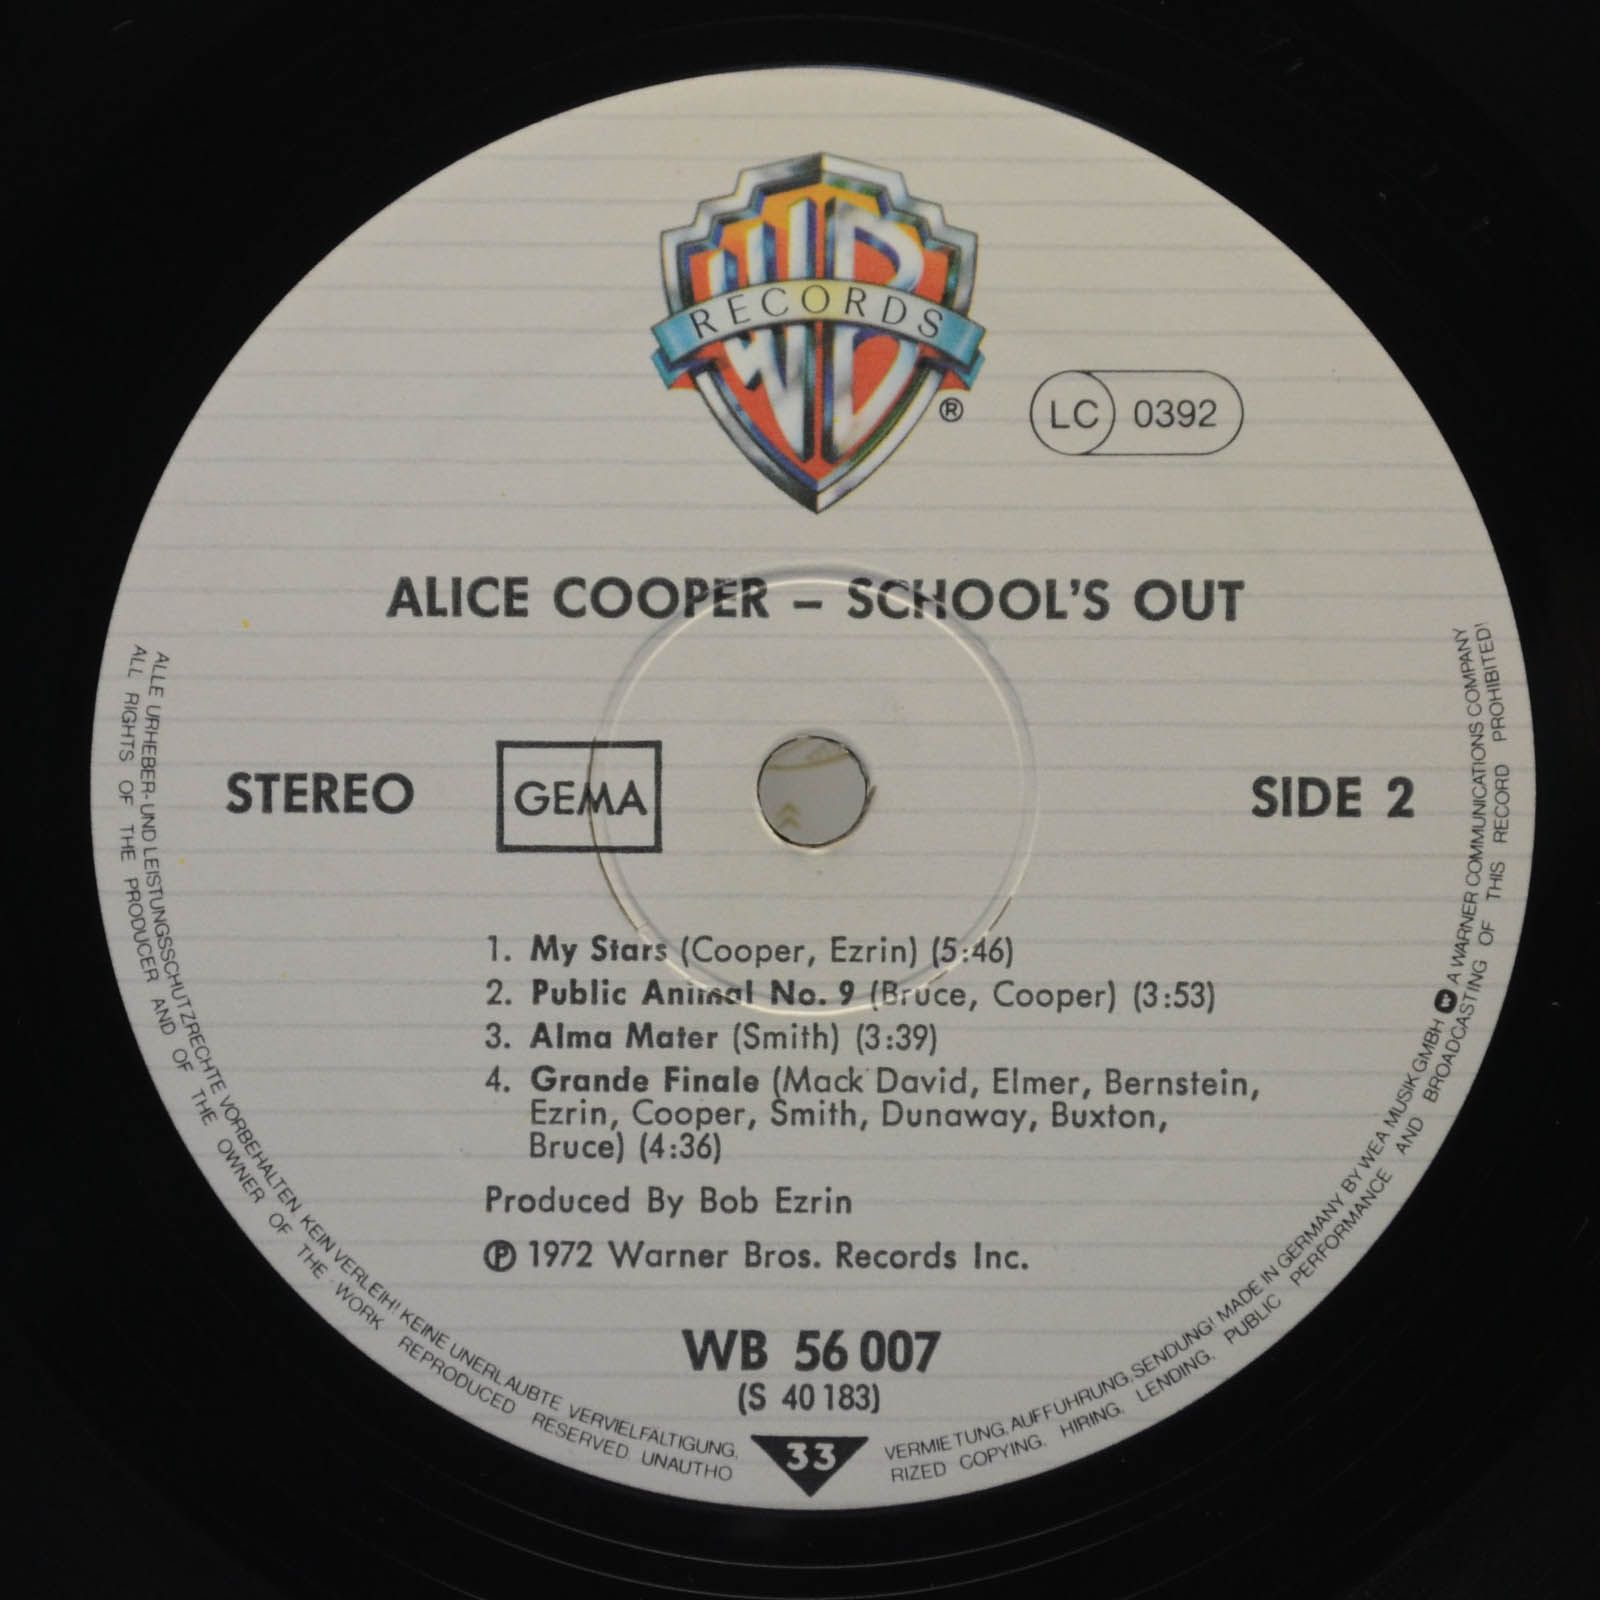 Alice Cooper — School's Out, 1972